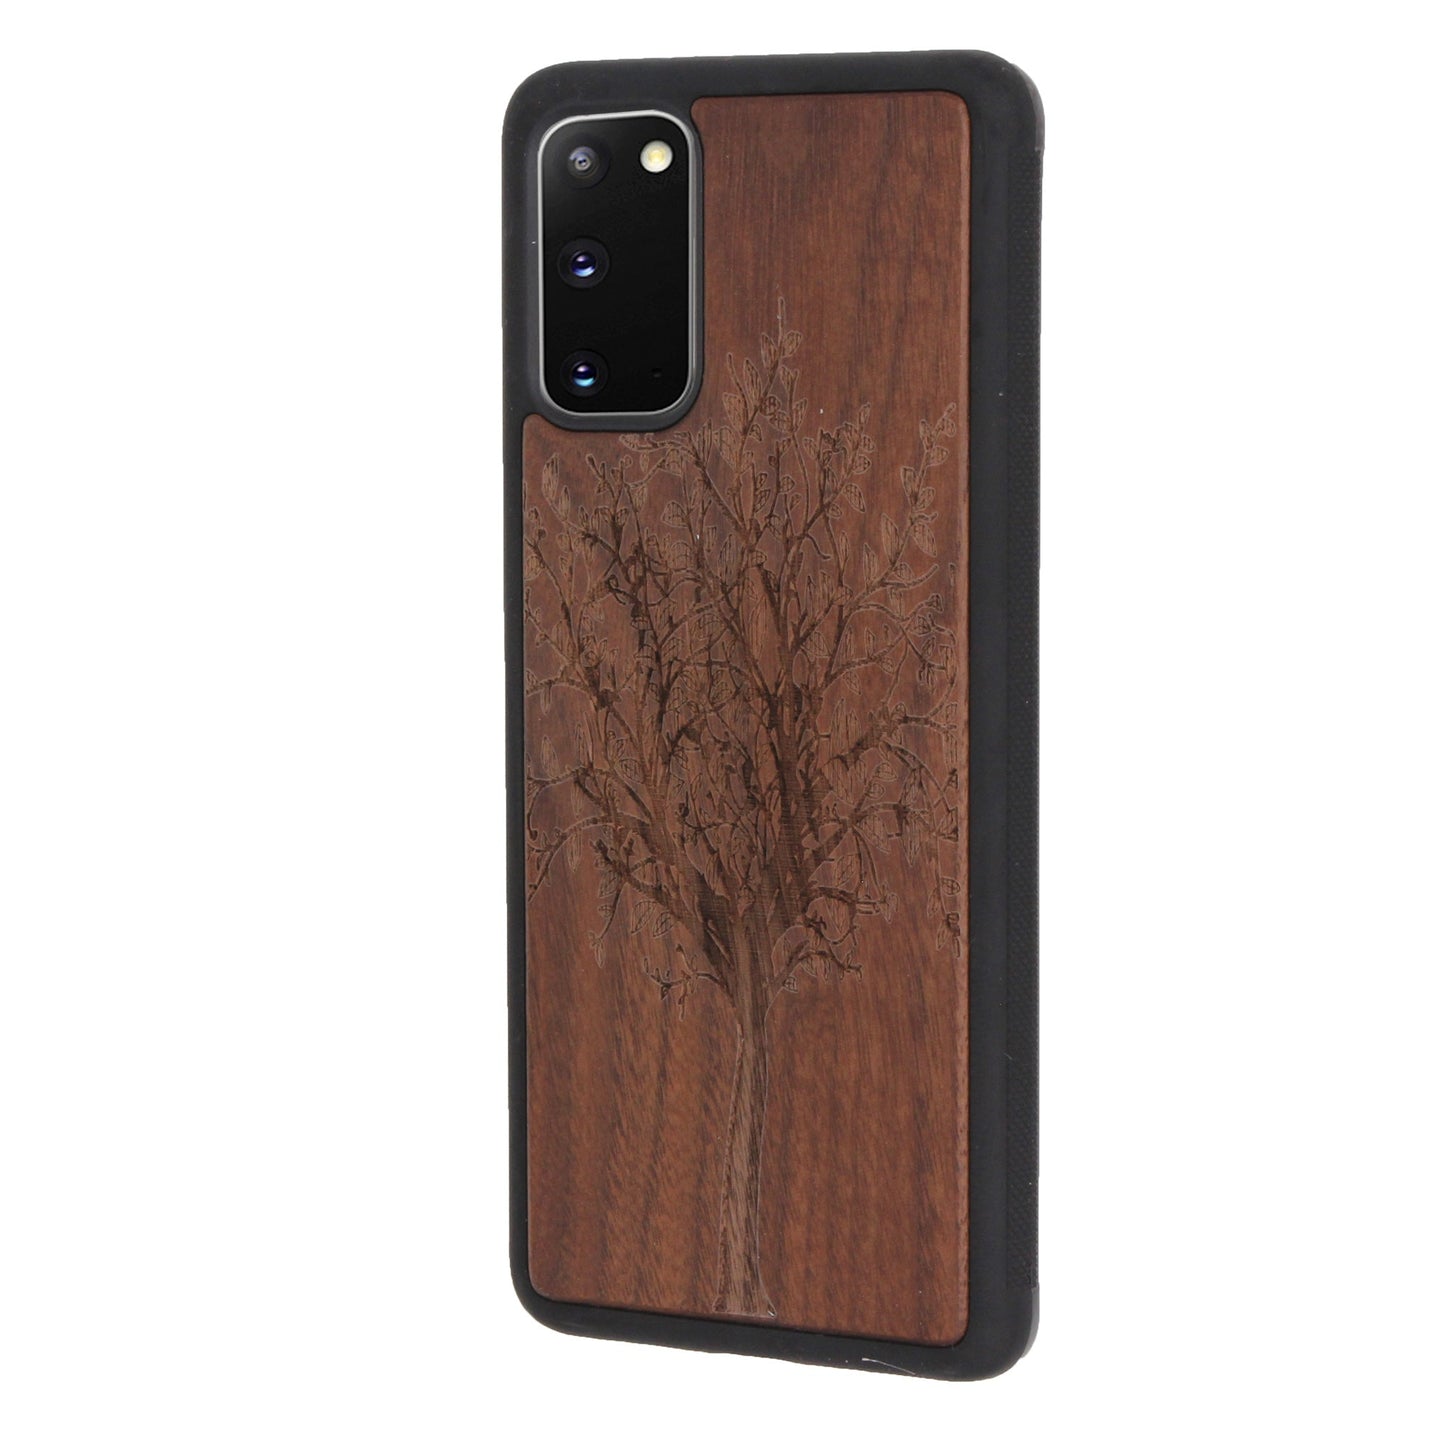 Tree of Life Eden case made of walnut wood for Samsung Galaxy S20